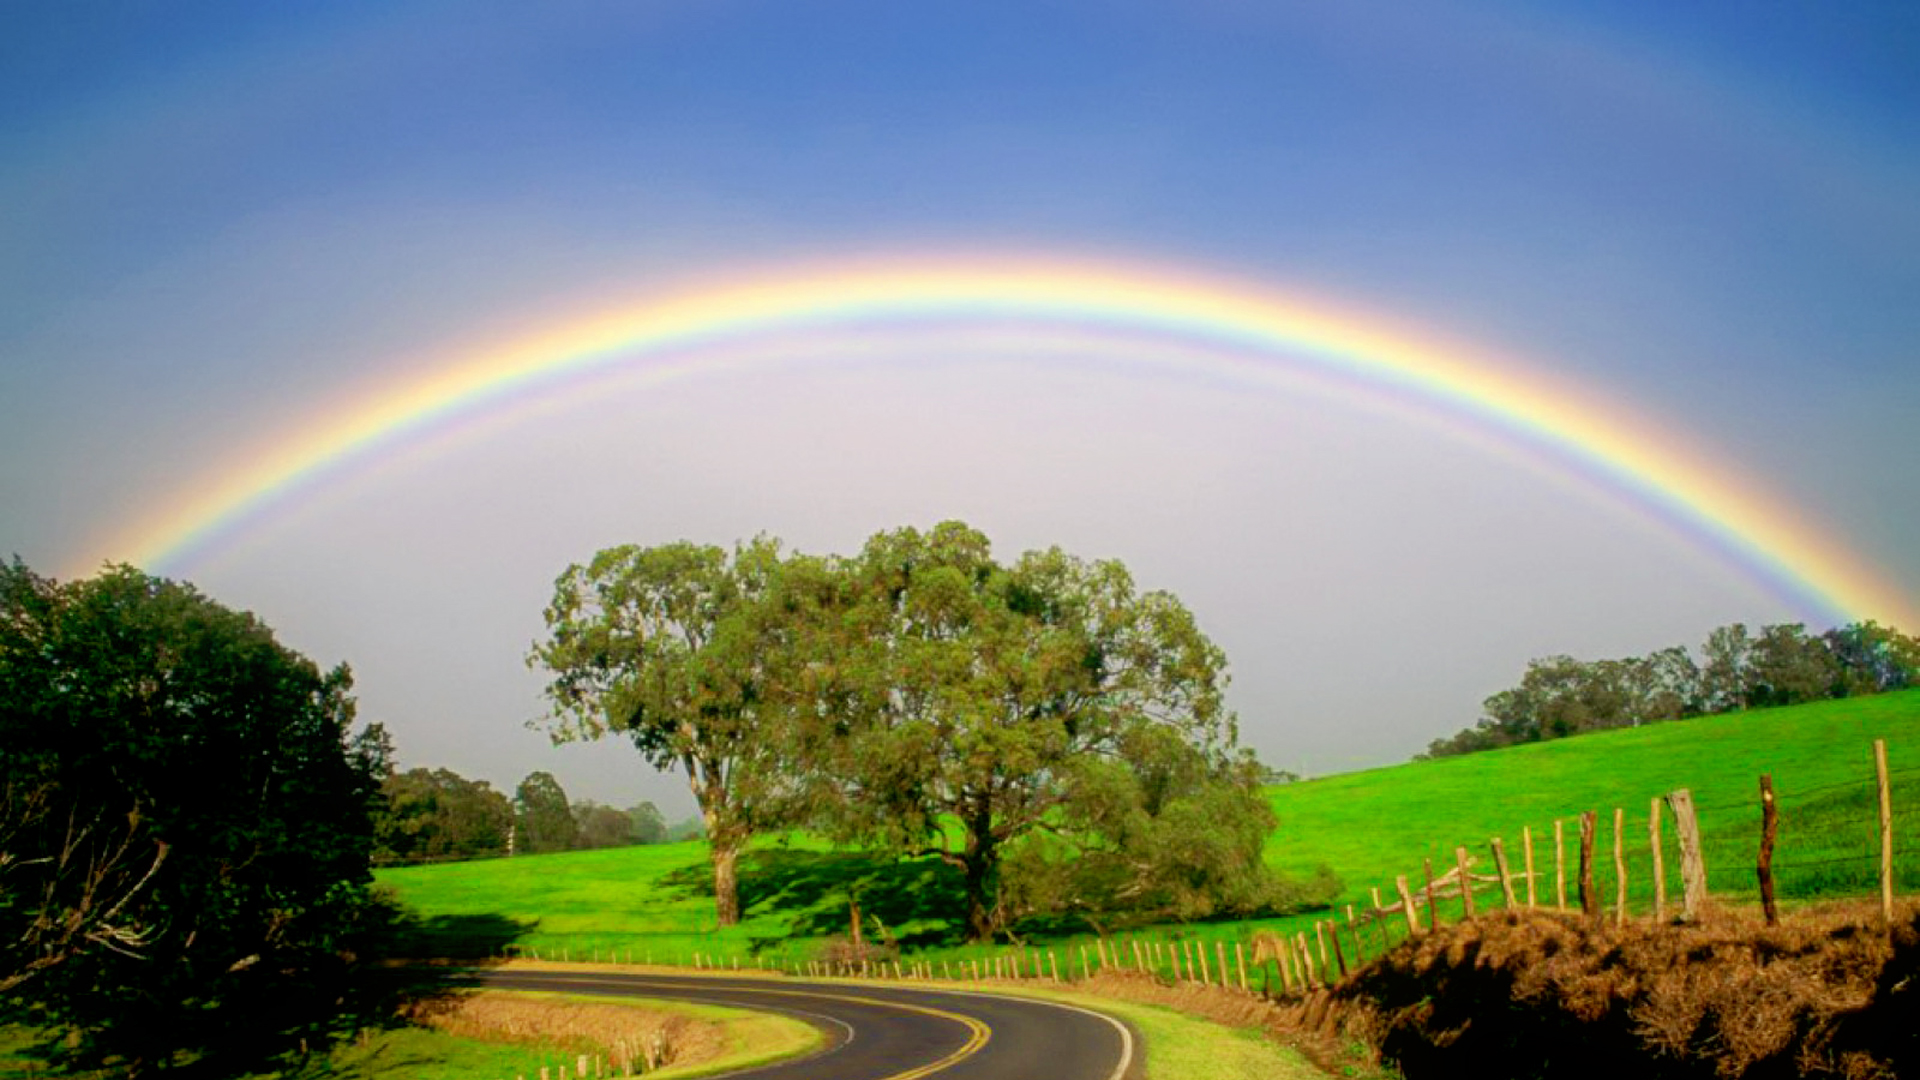 Colorful Rainbow Over The Road HD Rainbow Wallpaper